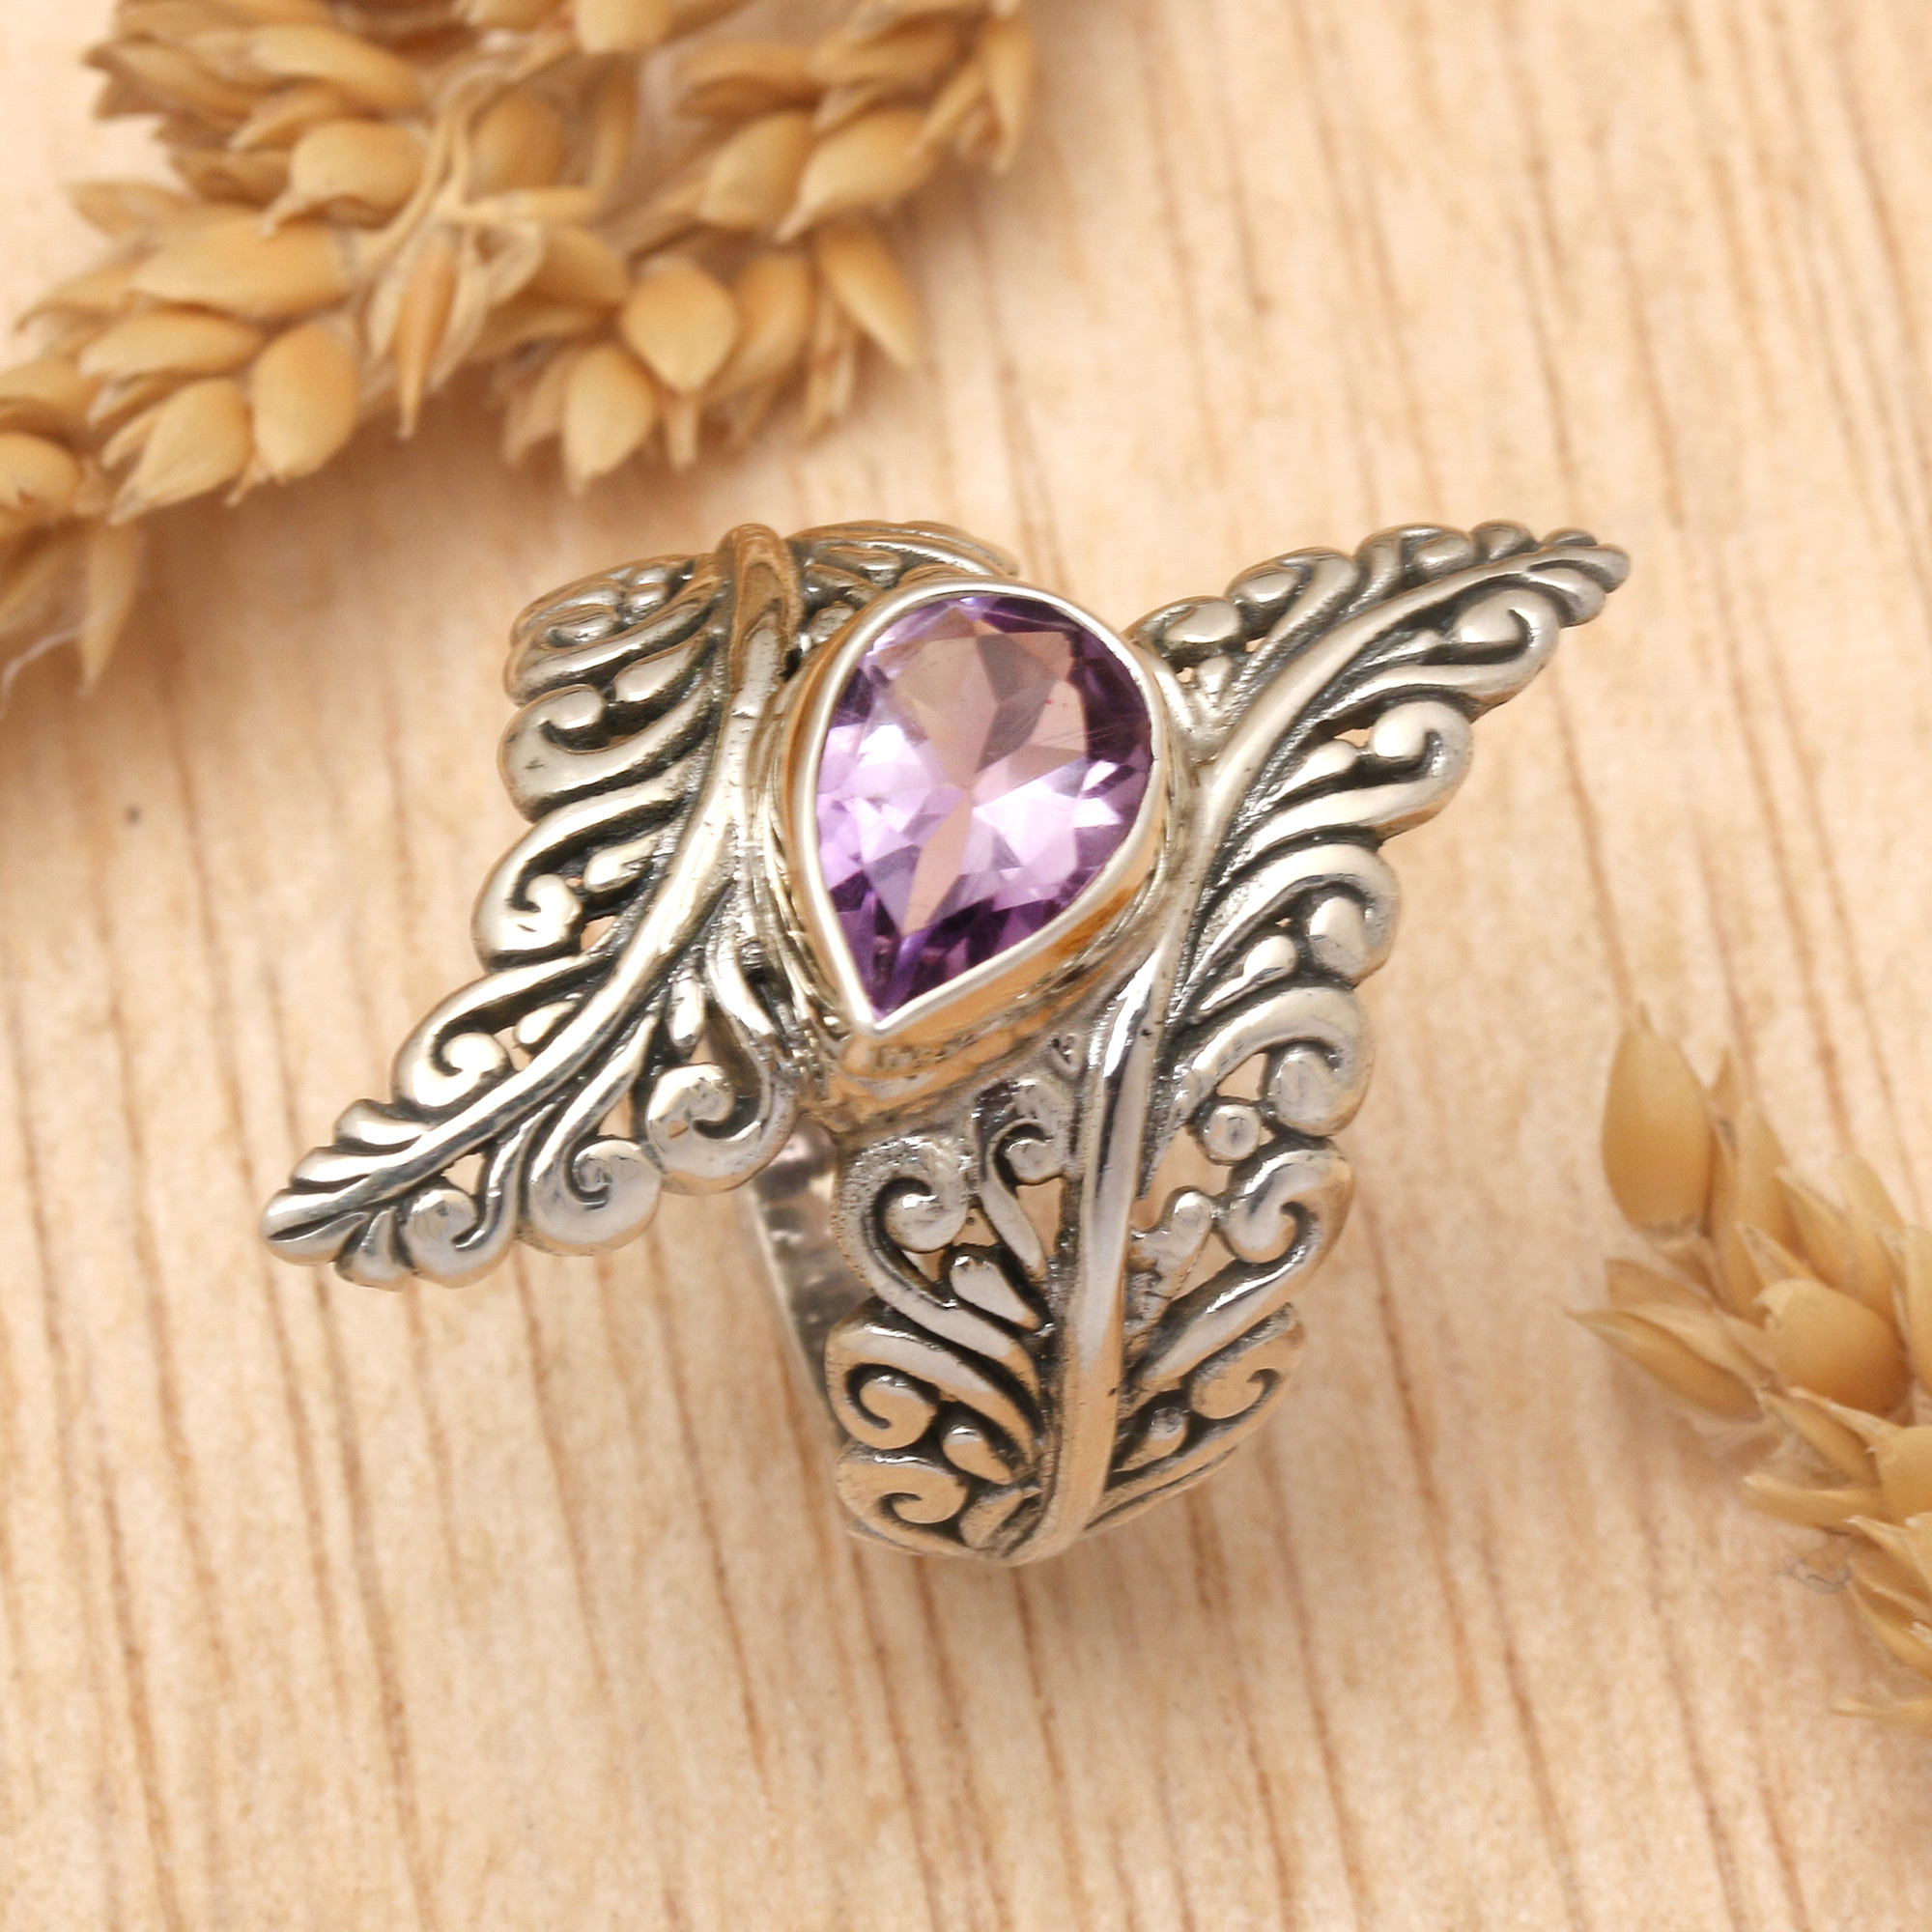 Amethyst and Sterling Silver Fern Cocktail Ring from Bali - Ferny